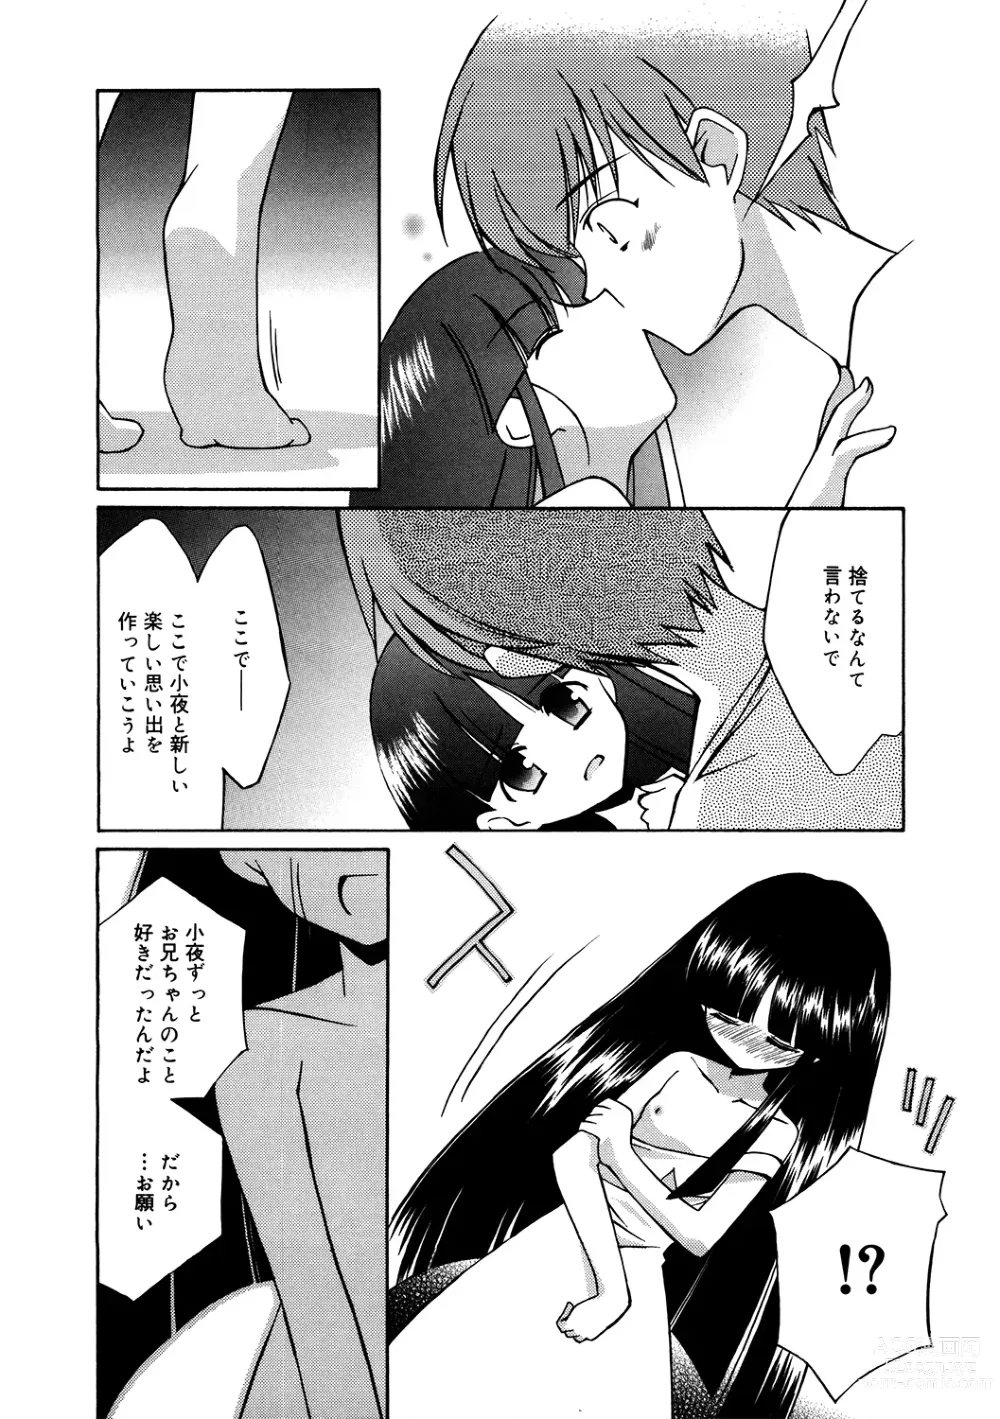 Page 176 of manga LQ -Little Queen- Vol. 52